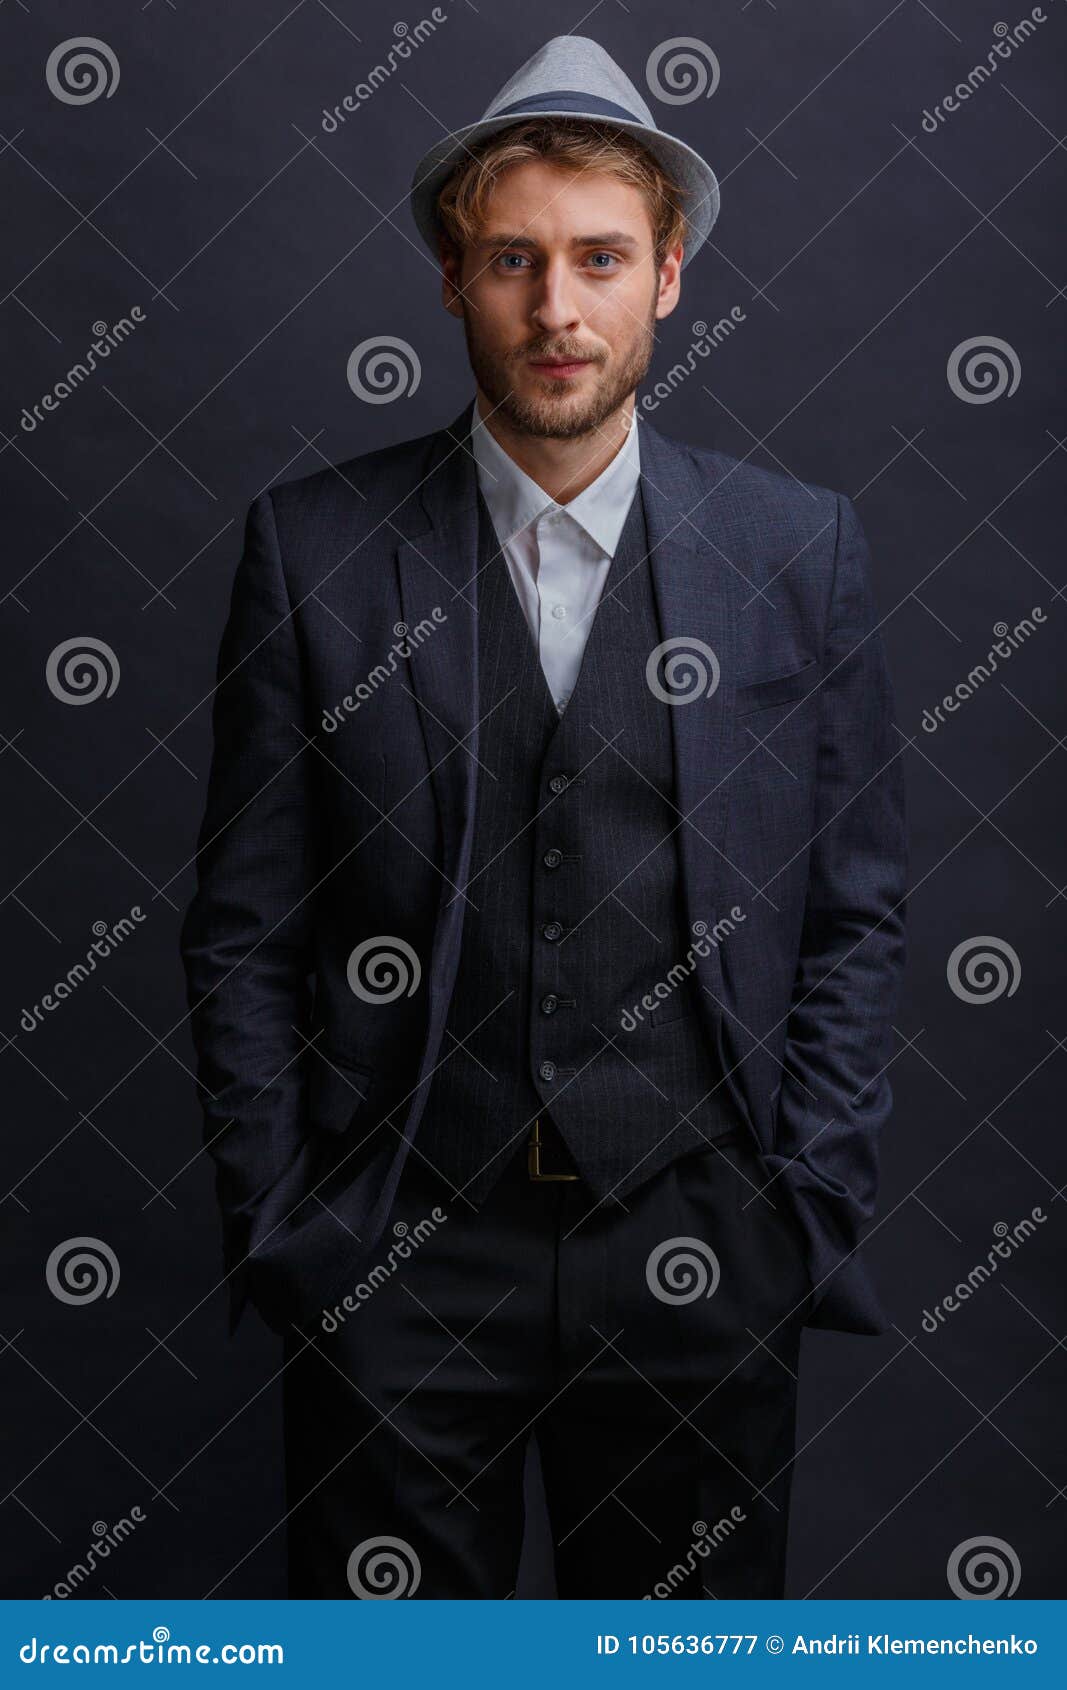 A Brunette Man in a Suit and Hat, Stands with a Serious Look and Grits ...